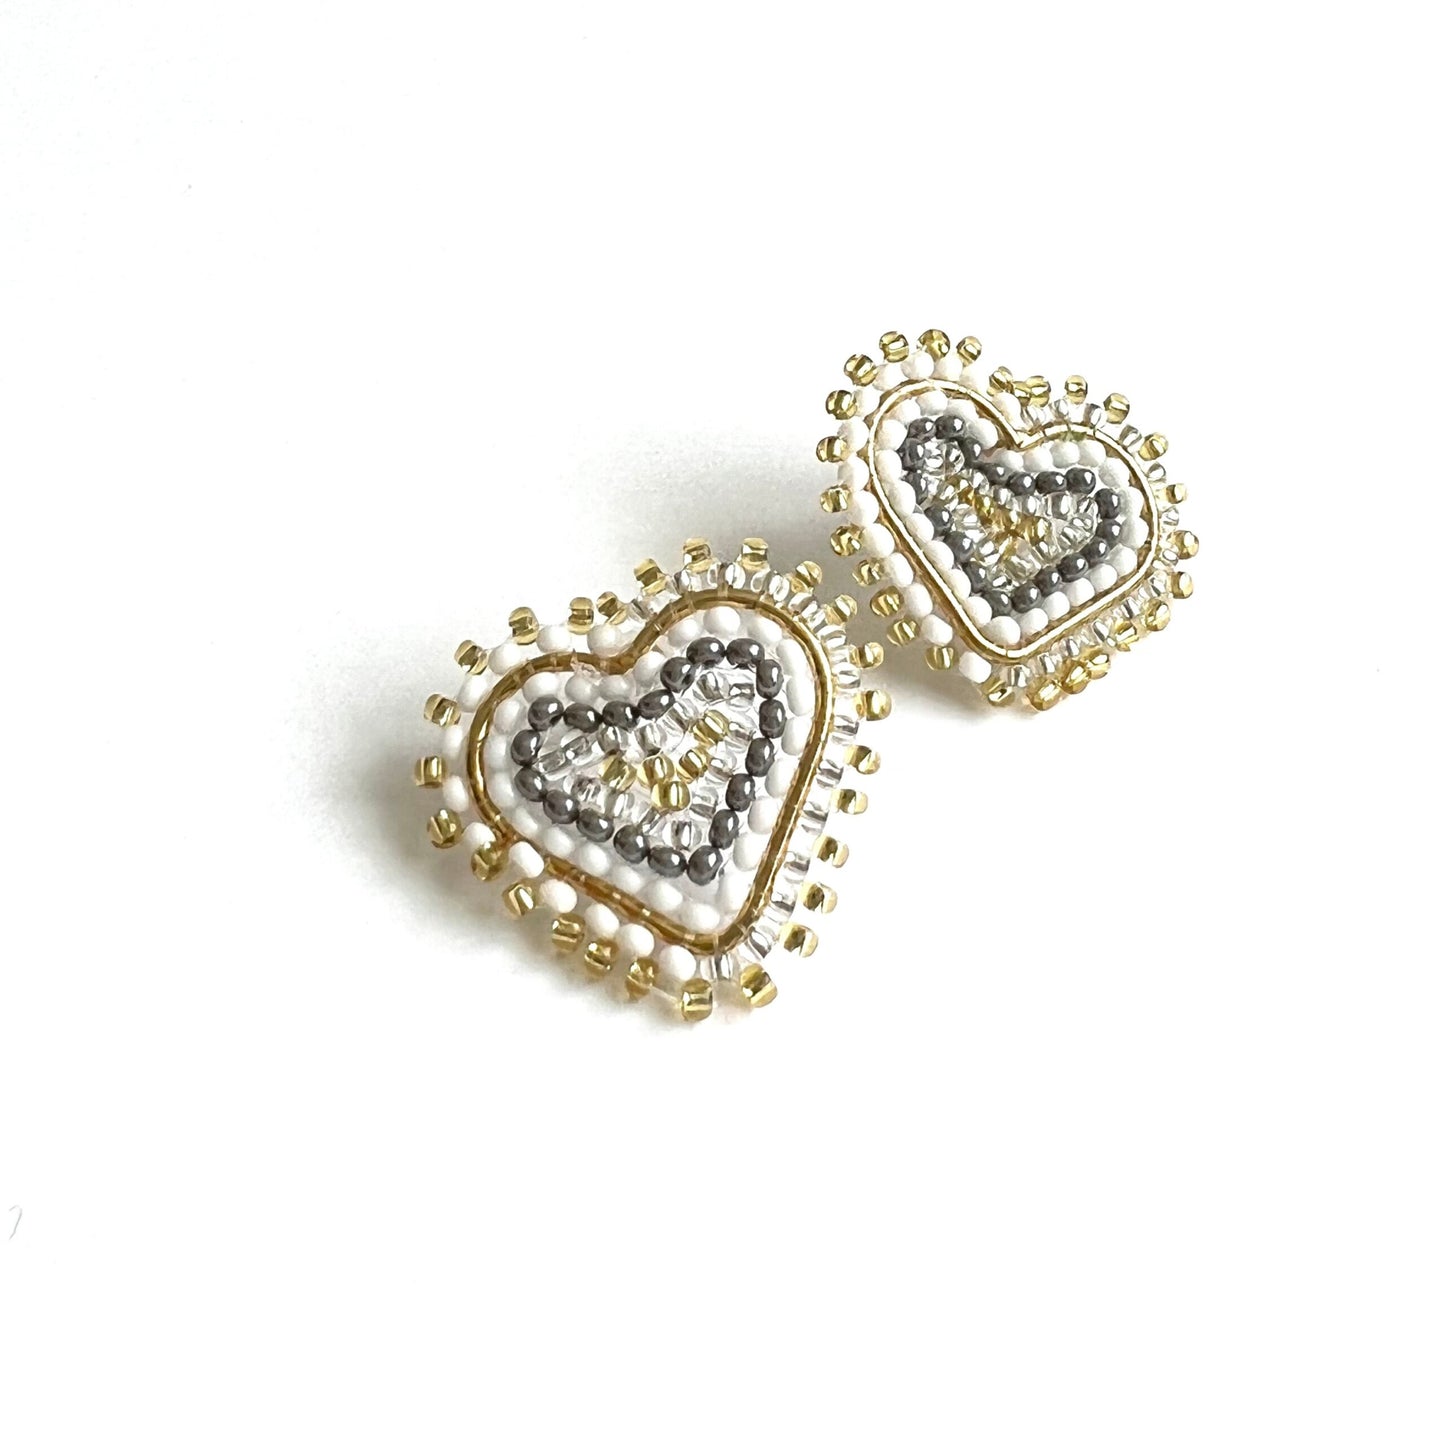 White and Golden Heart Studs